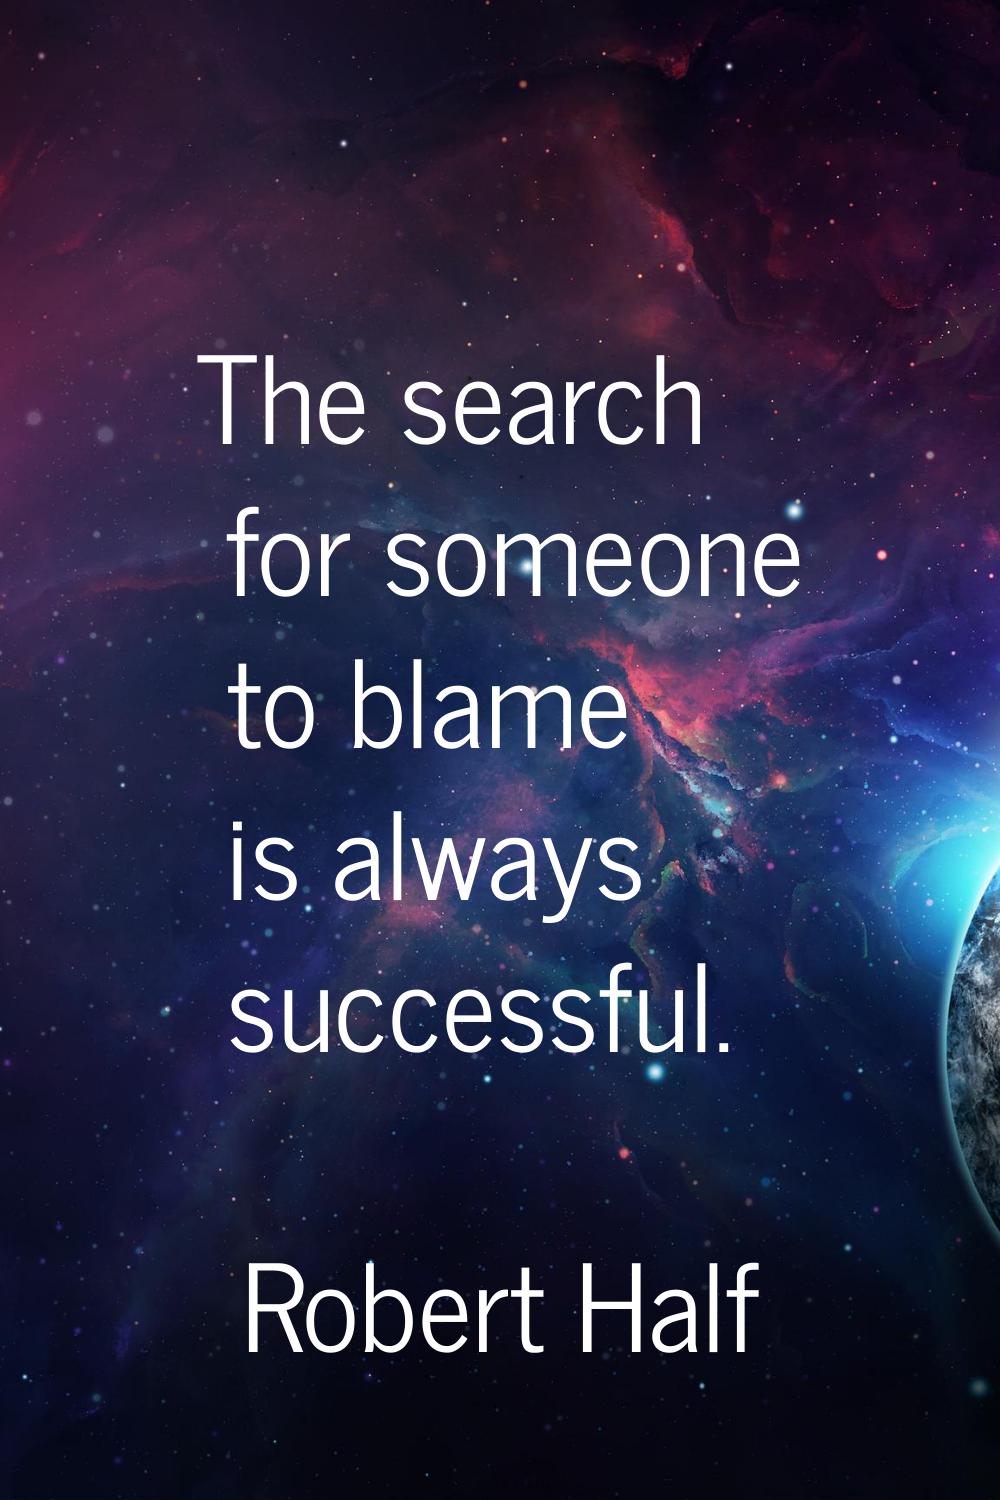 The search for someone to blame is always successful.